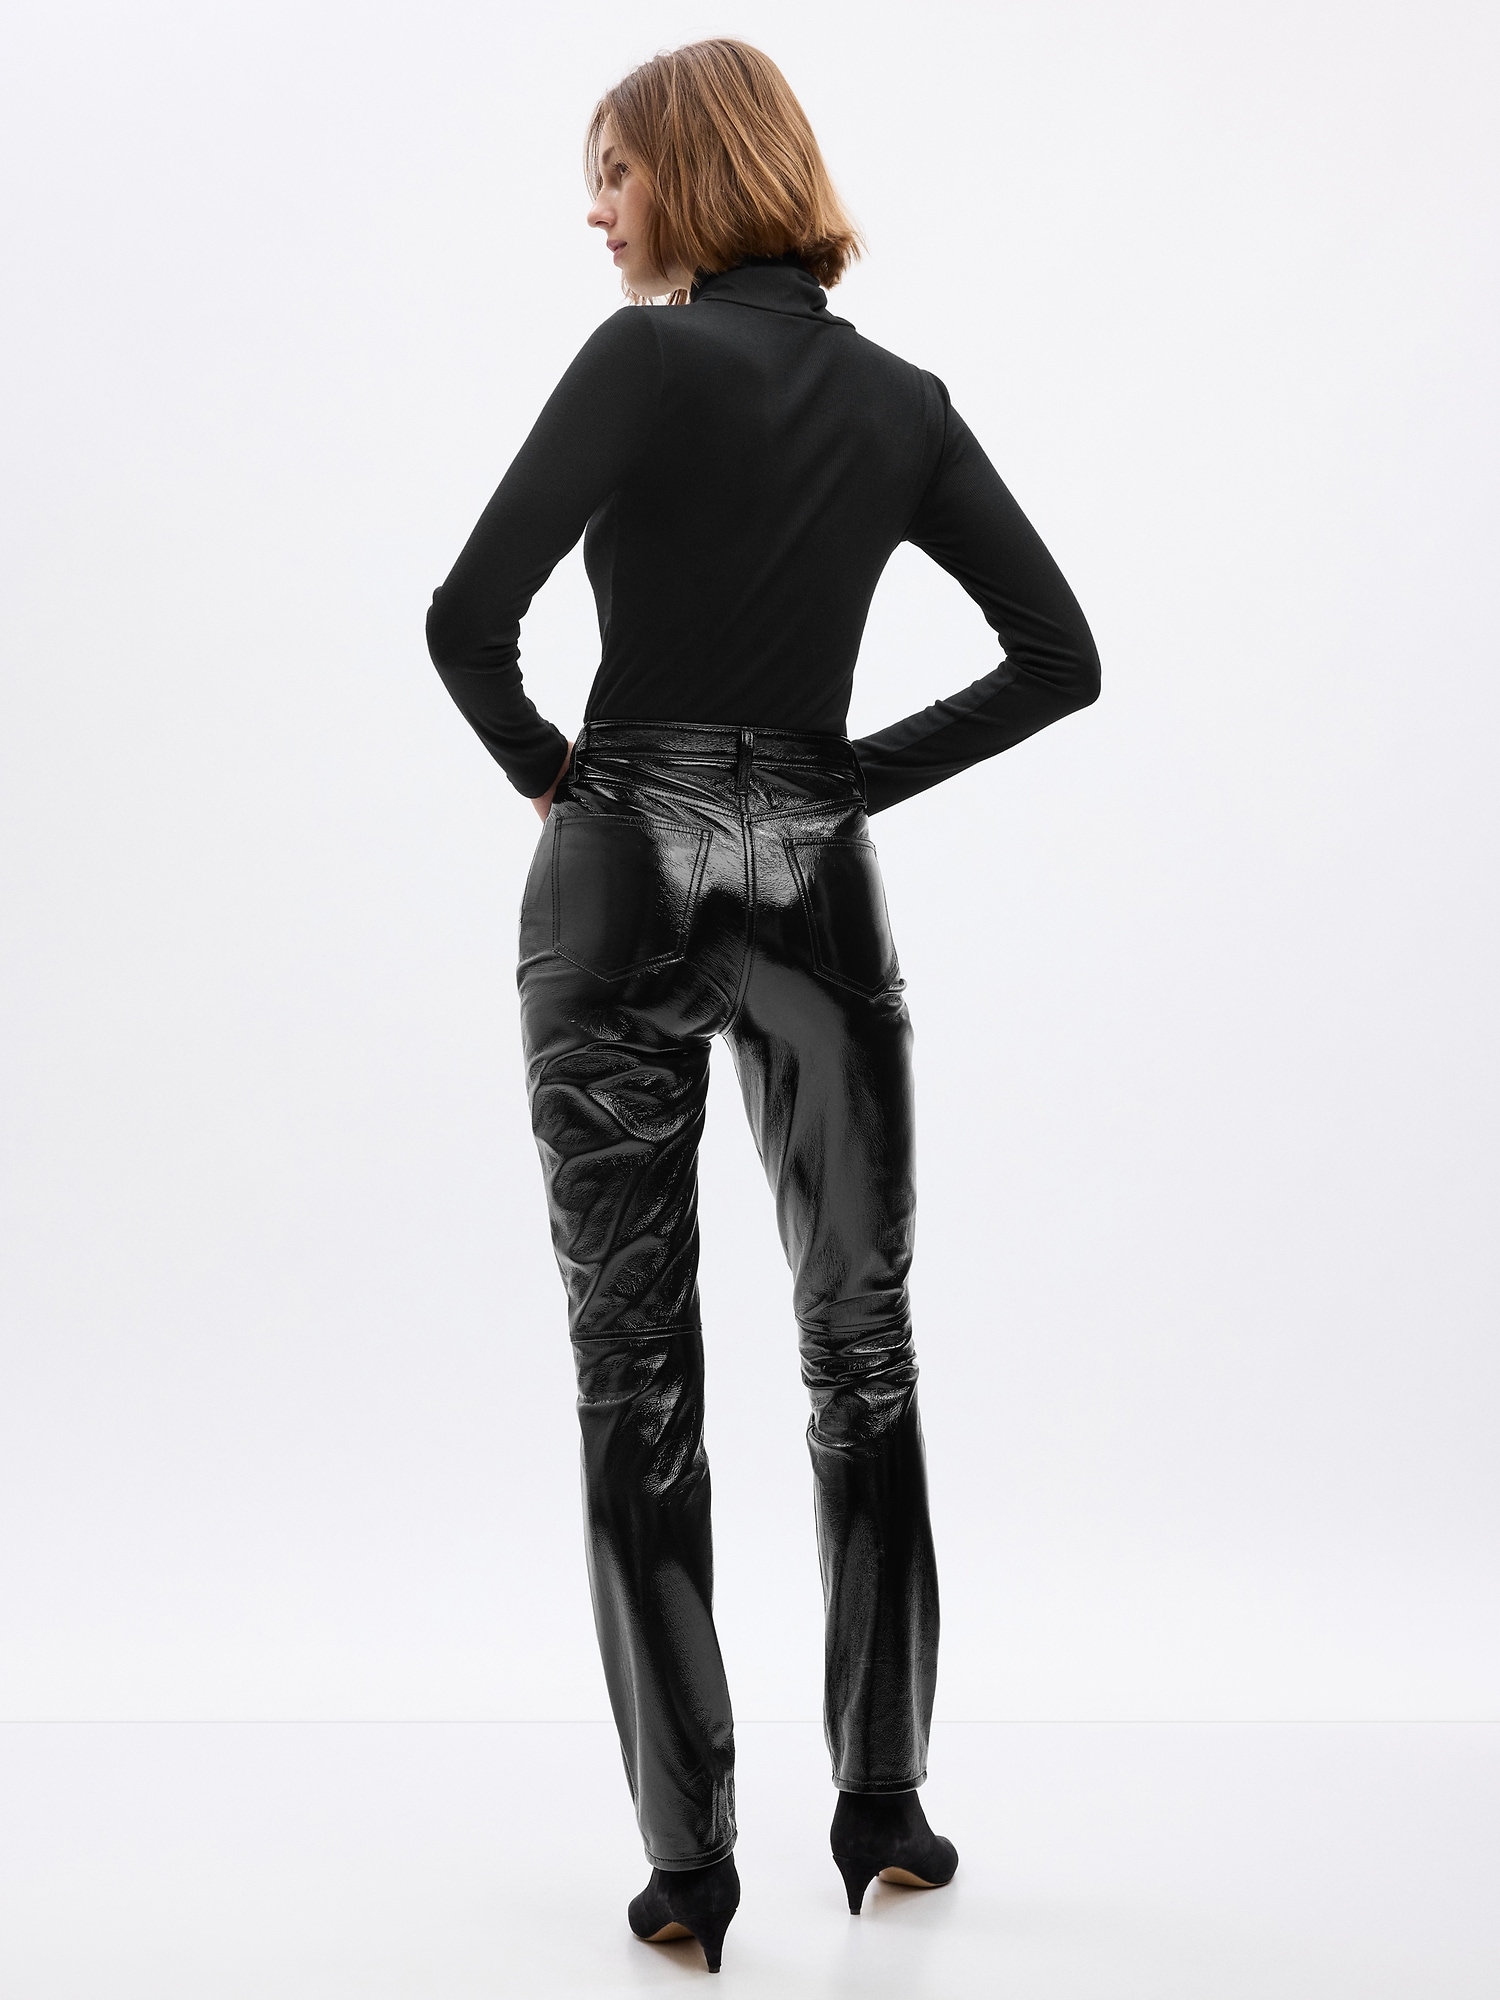 My Review of Spanx's Faux Leather Patent Leggings | The Everygirl